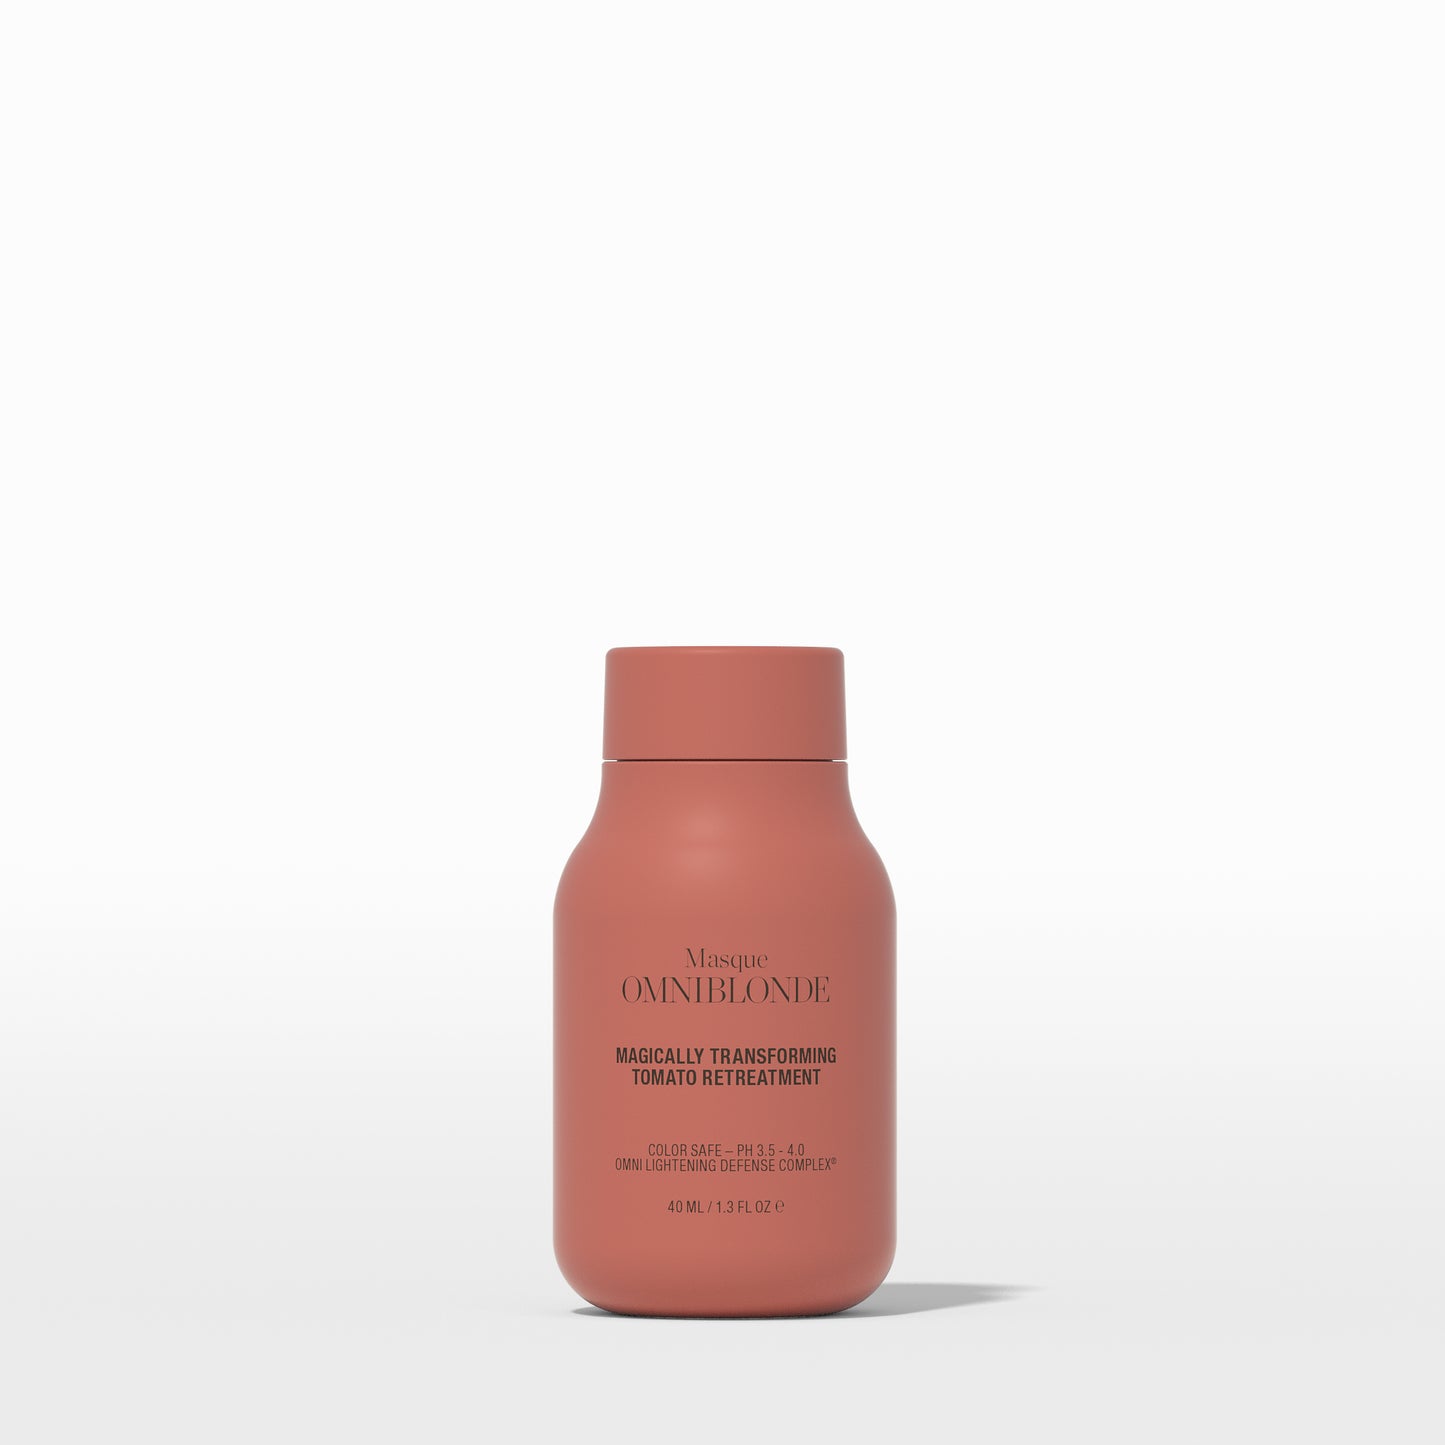 Omniblonde Magically Transforming Tomato Treatment